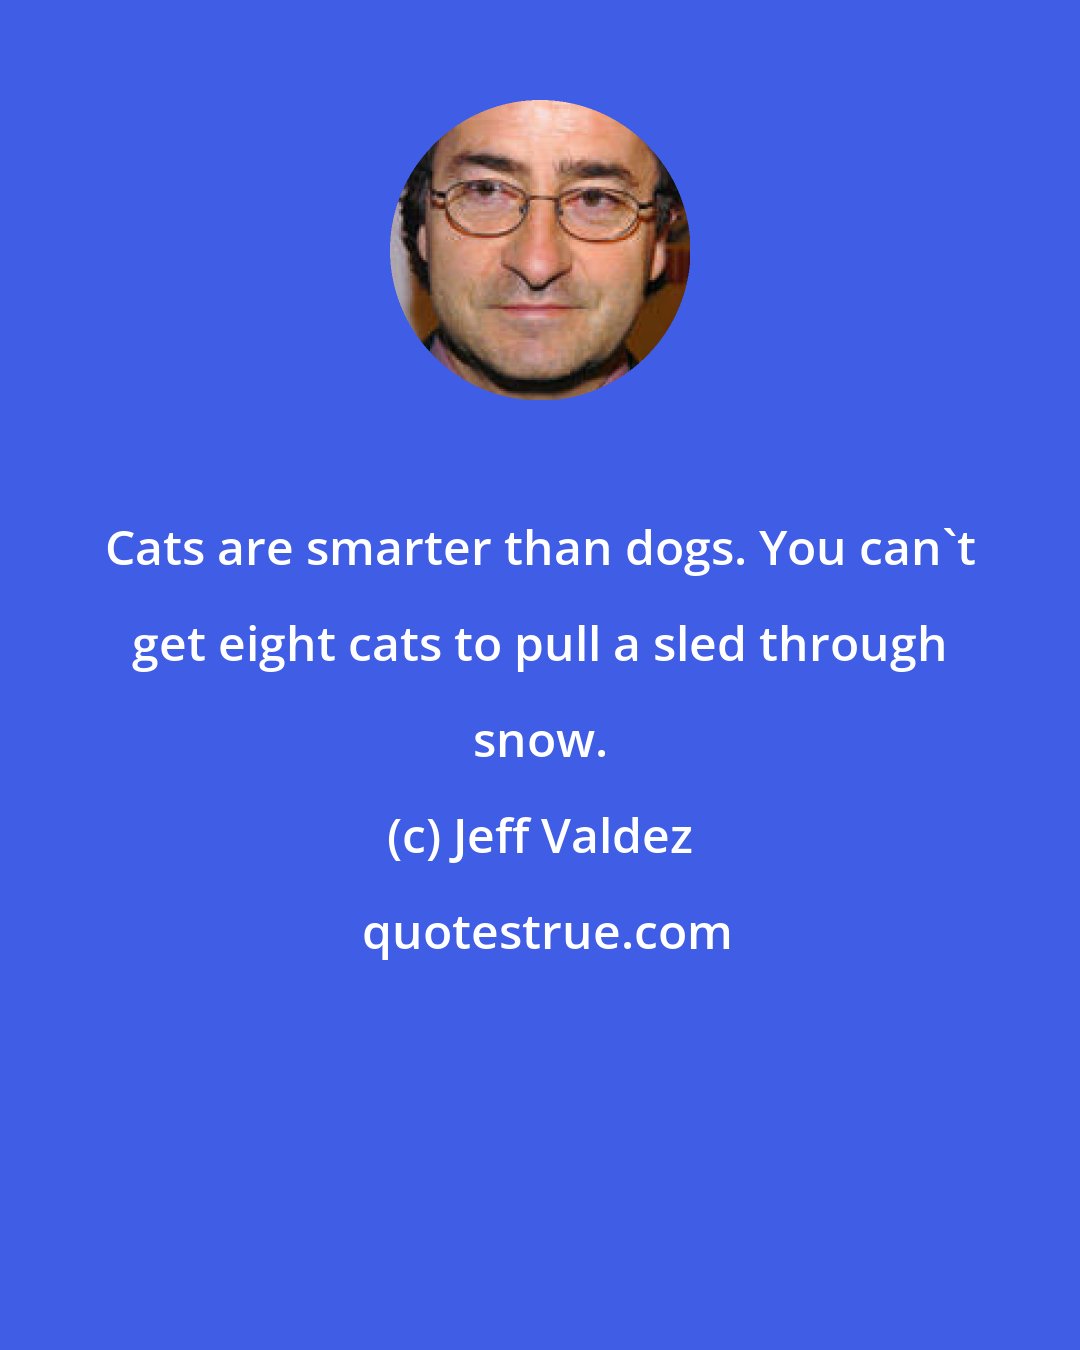 Jeff Valdez: Cats are smarter than dogs. You can't get eight cats to pull a sled through snow.